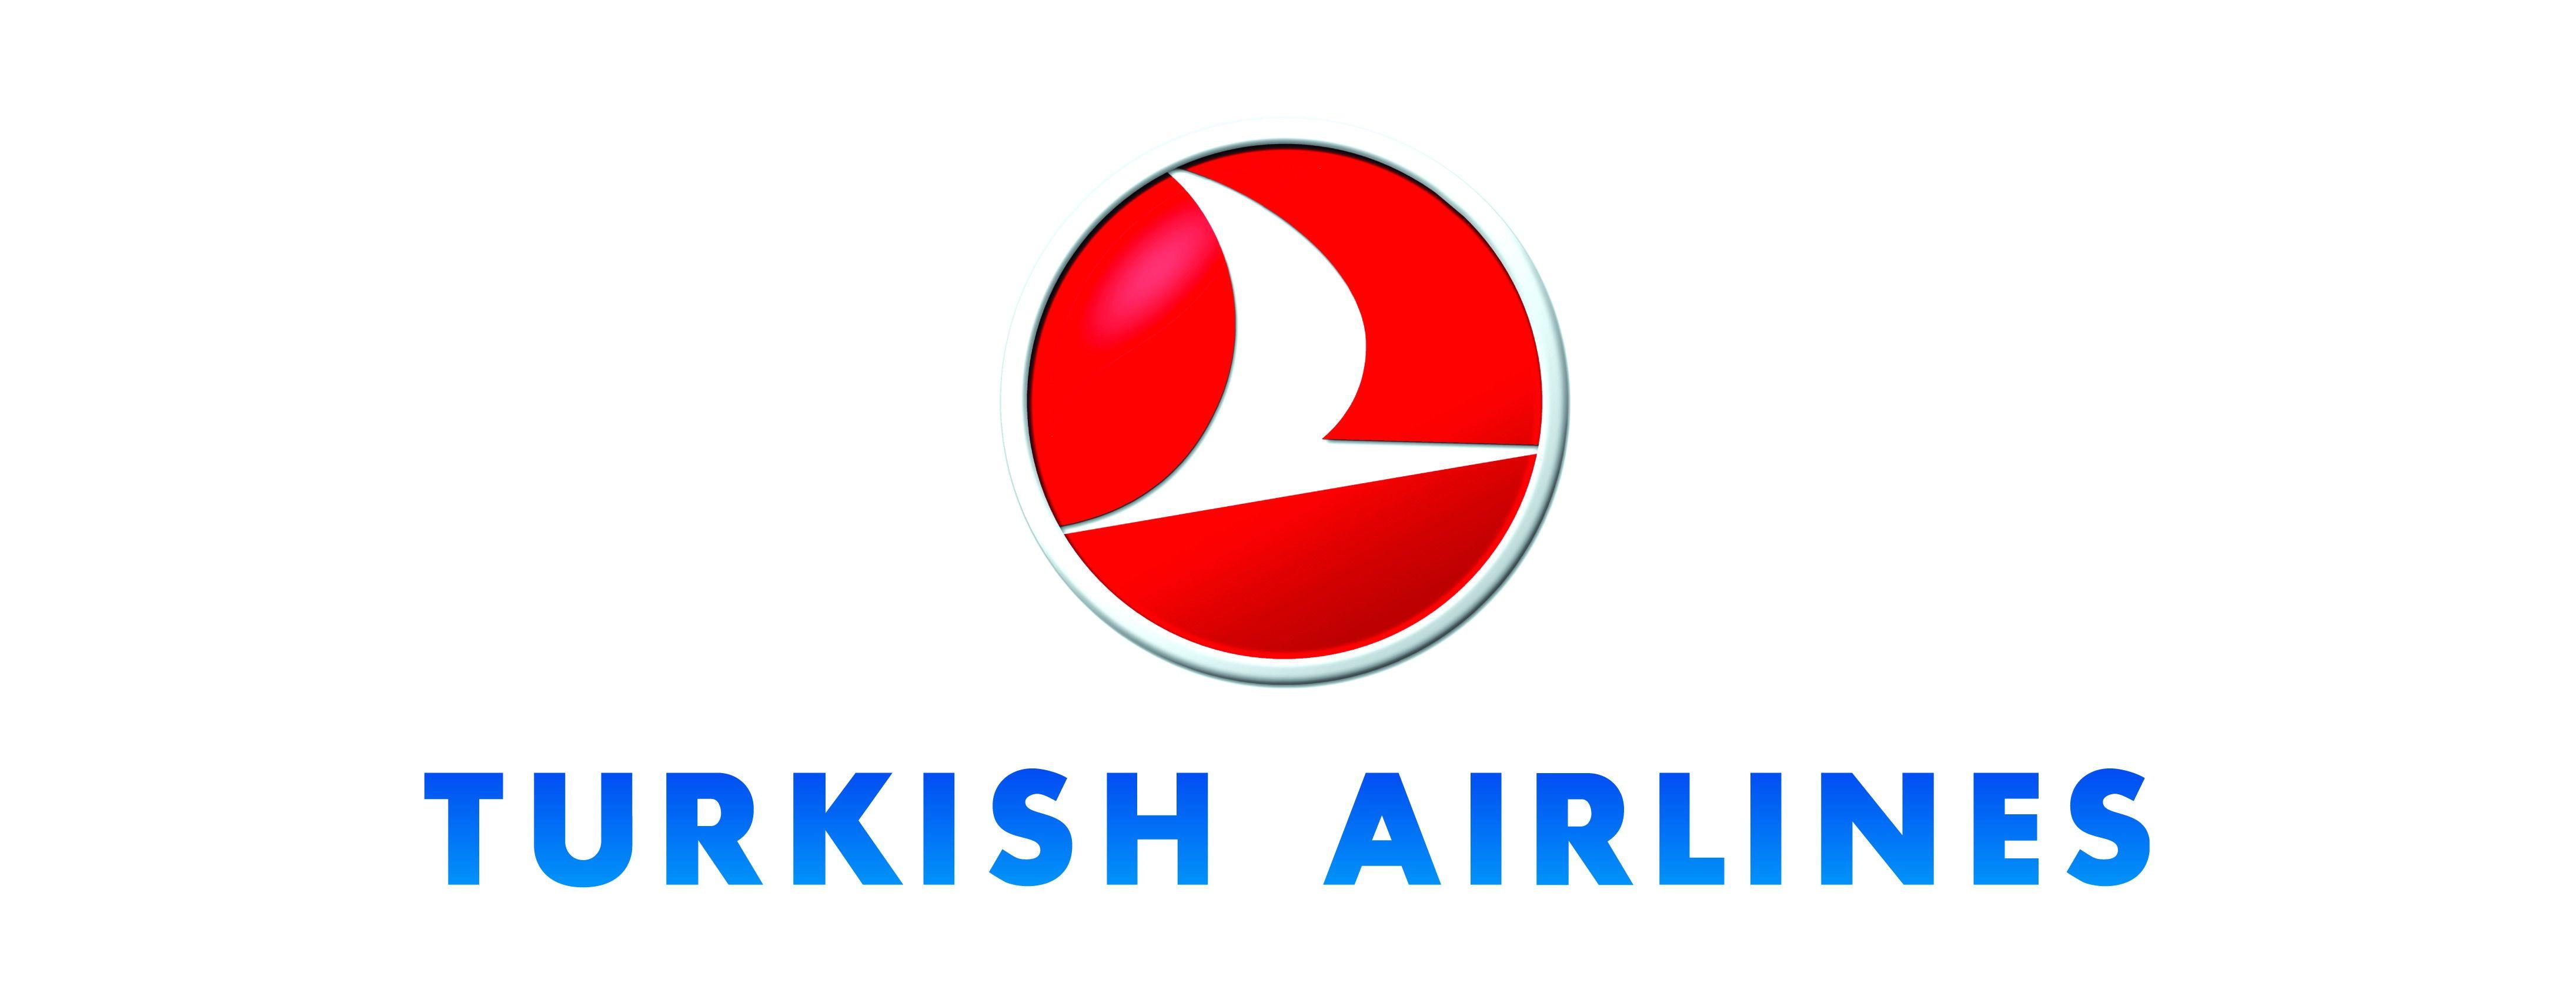 Turkish Airlines Logo - Airline logos. Airline logo